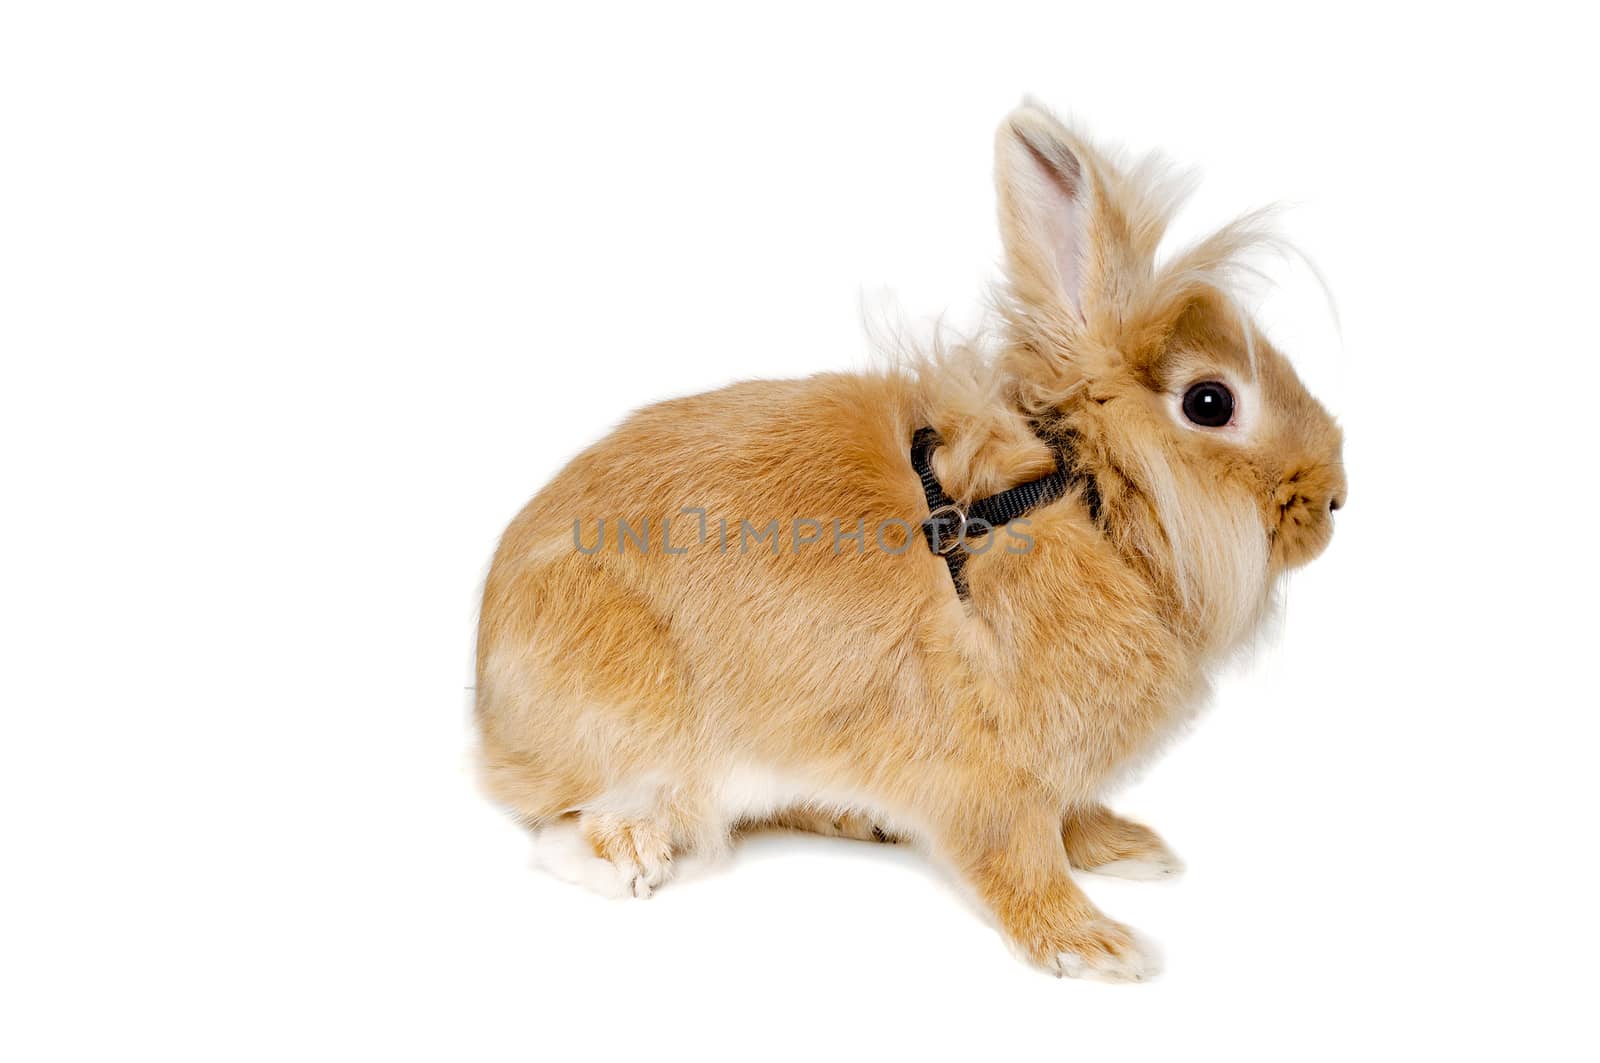 Rabbit isolated on white background by cfoto